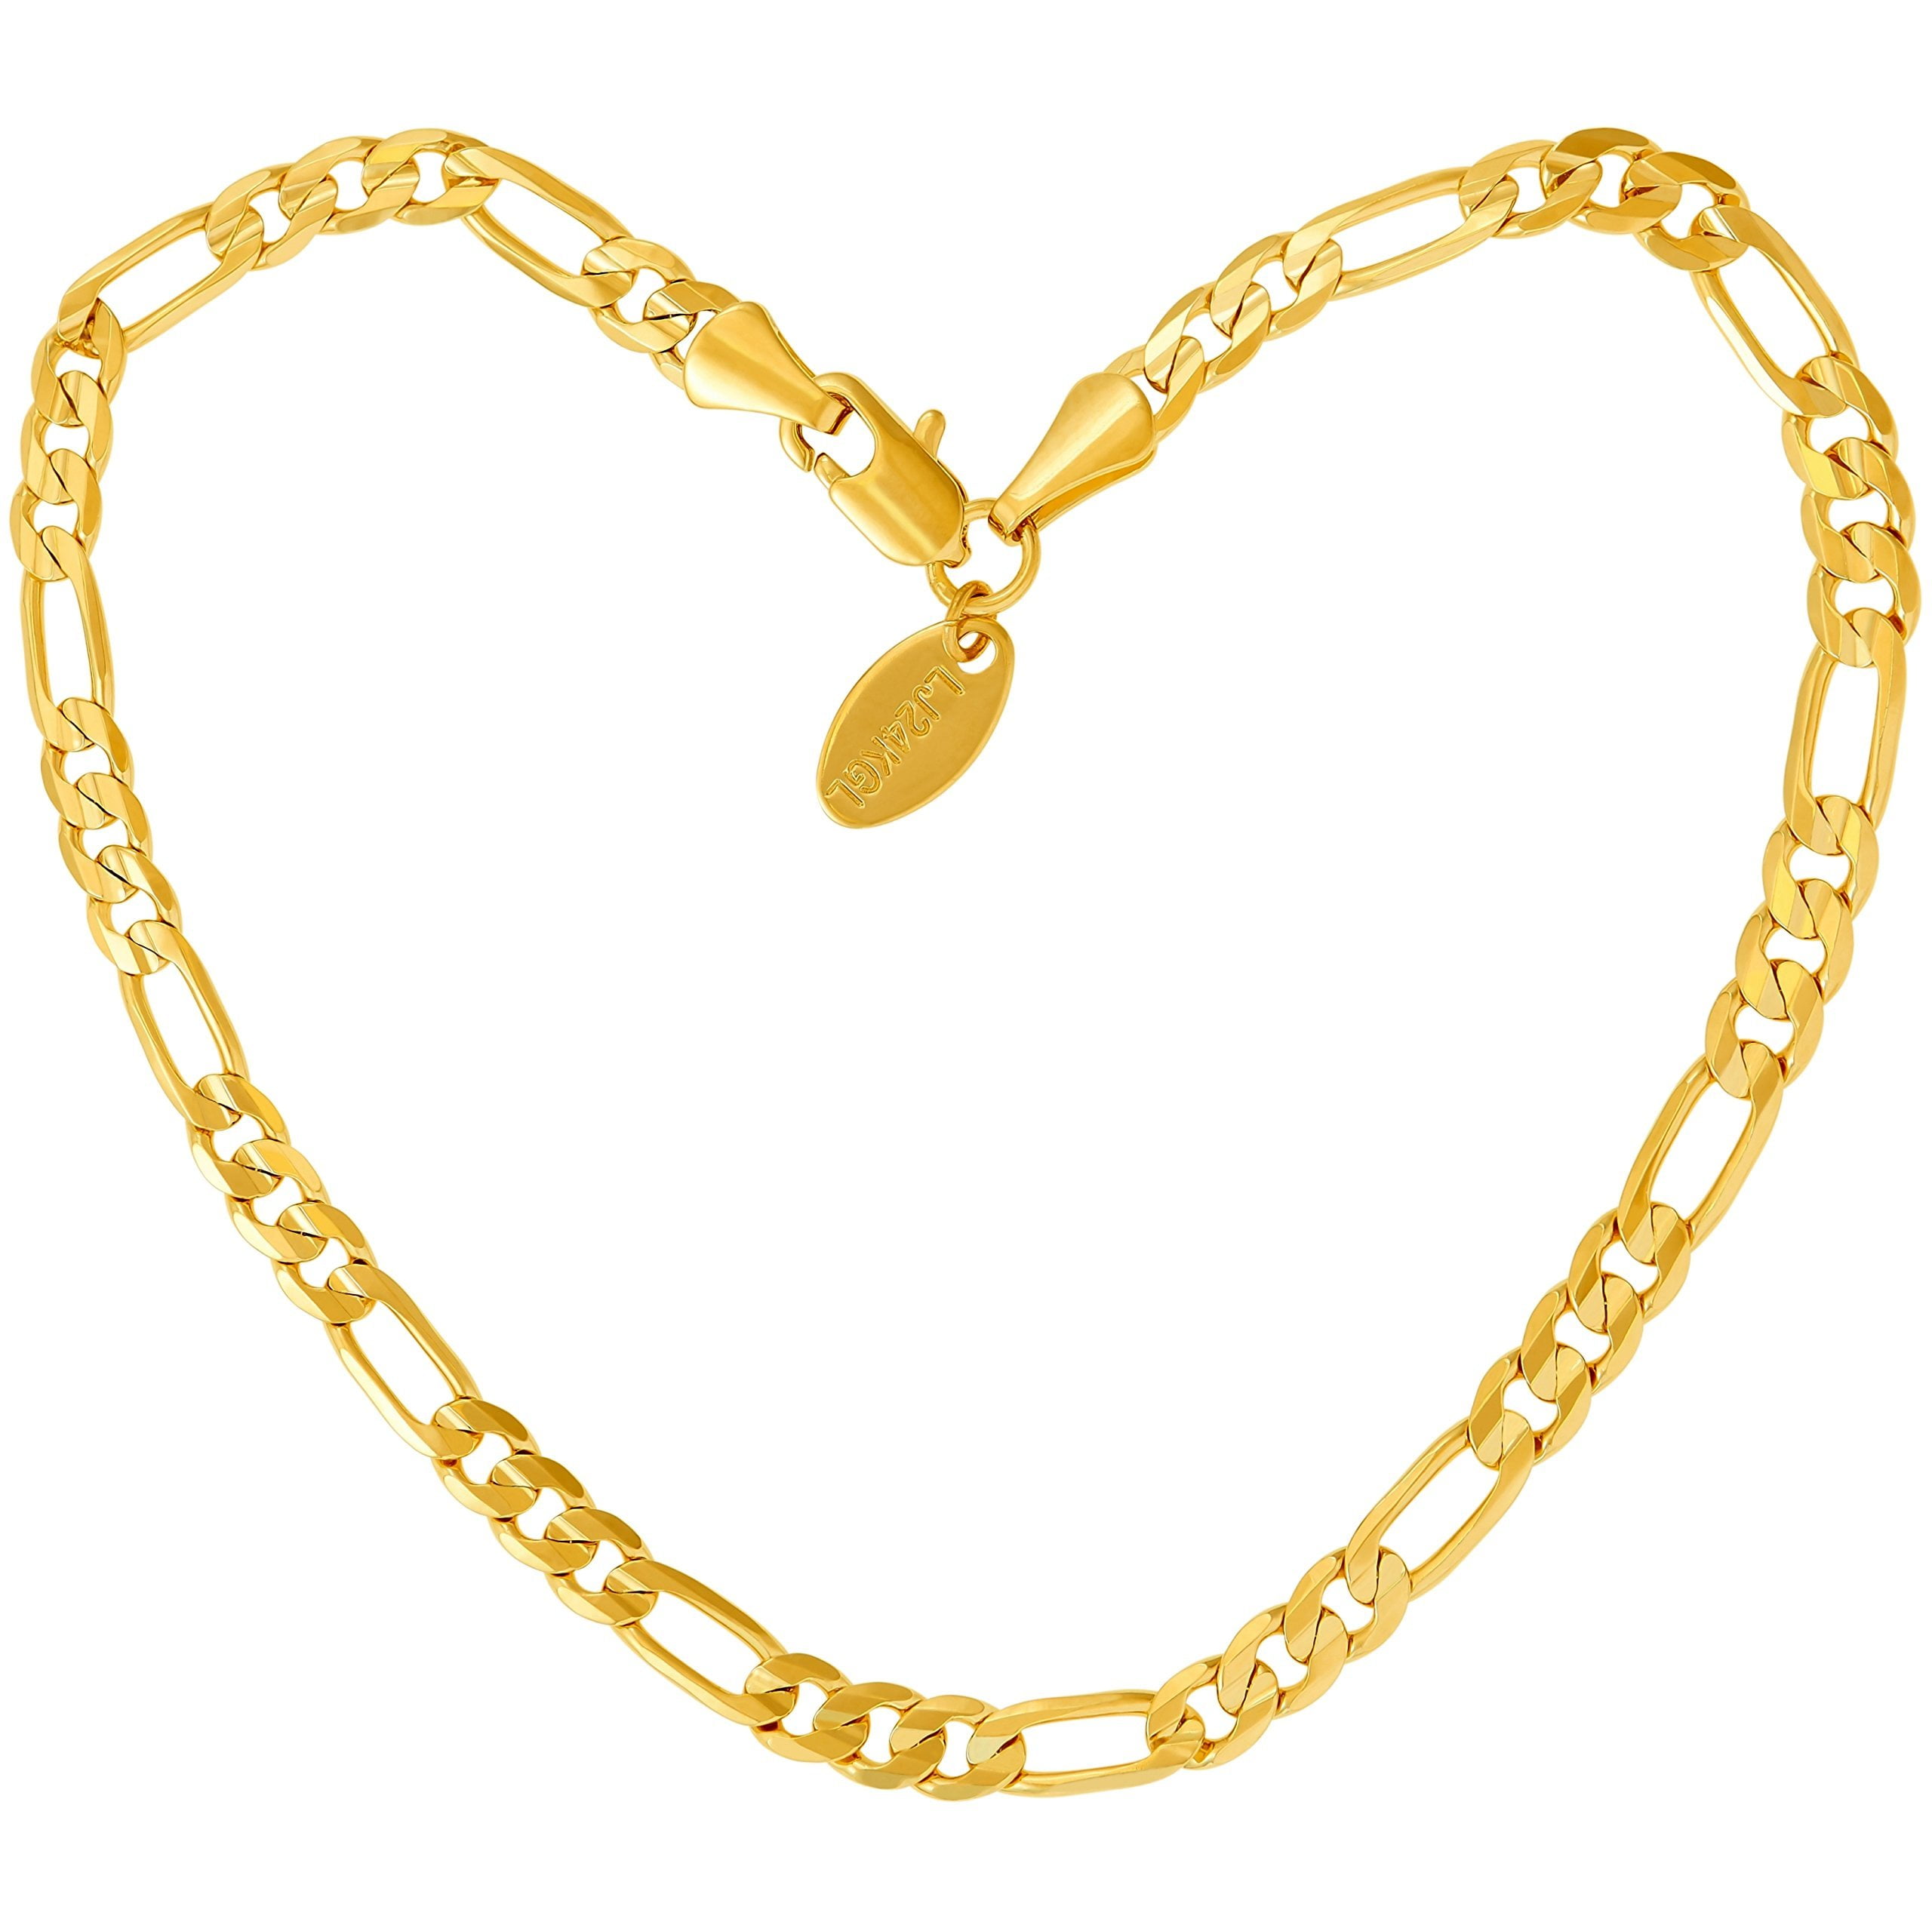 LIFETIME JEWELRY 4mm Figaro Chain Necklace 24k Gold Plated for Men Women & Teens 